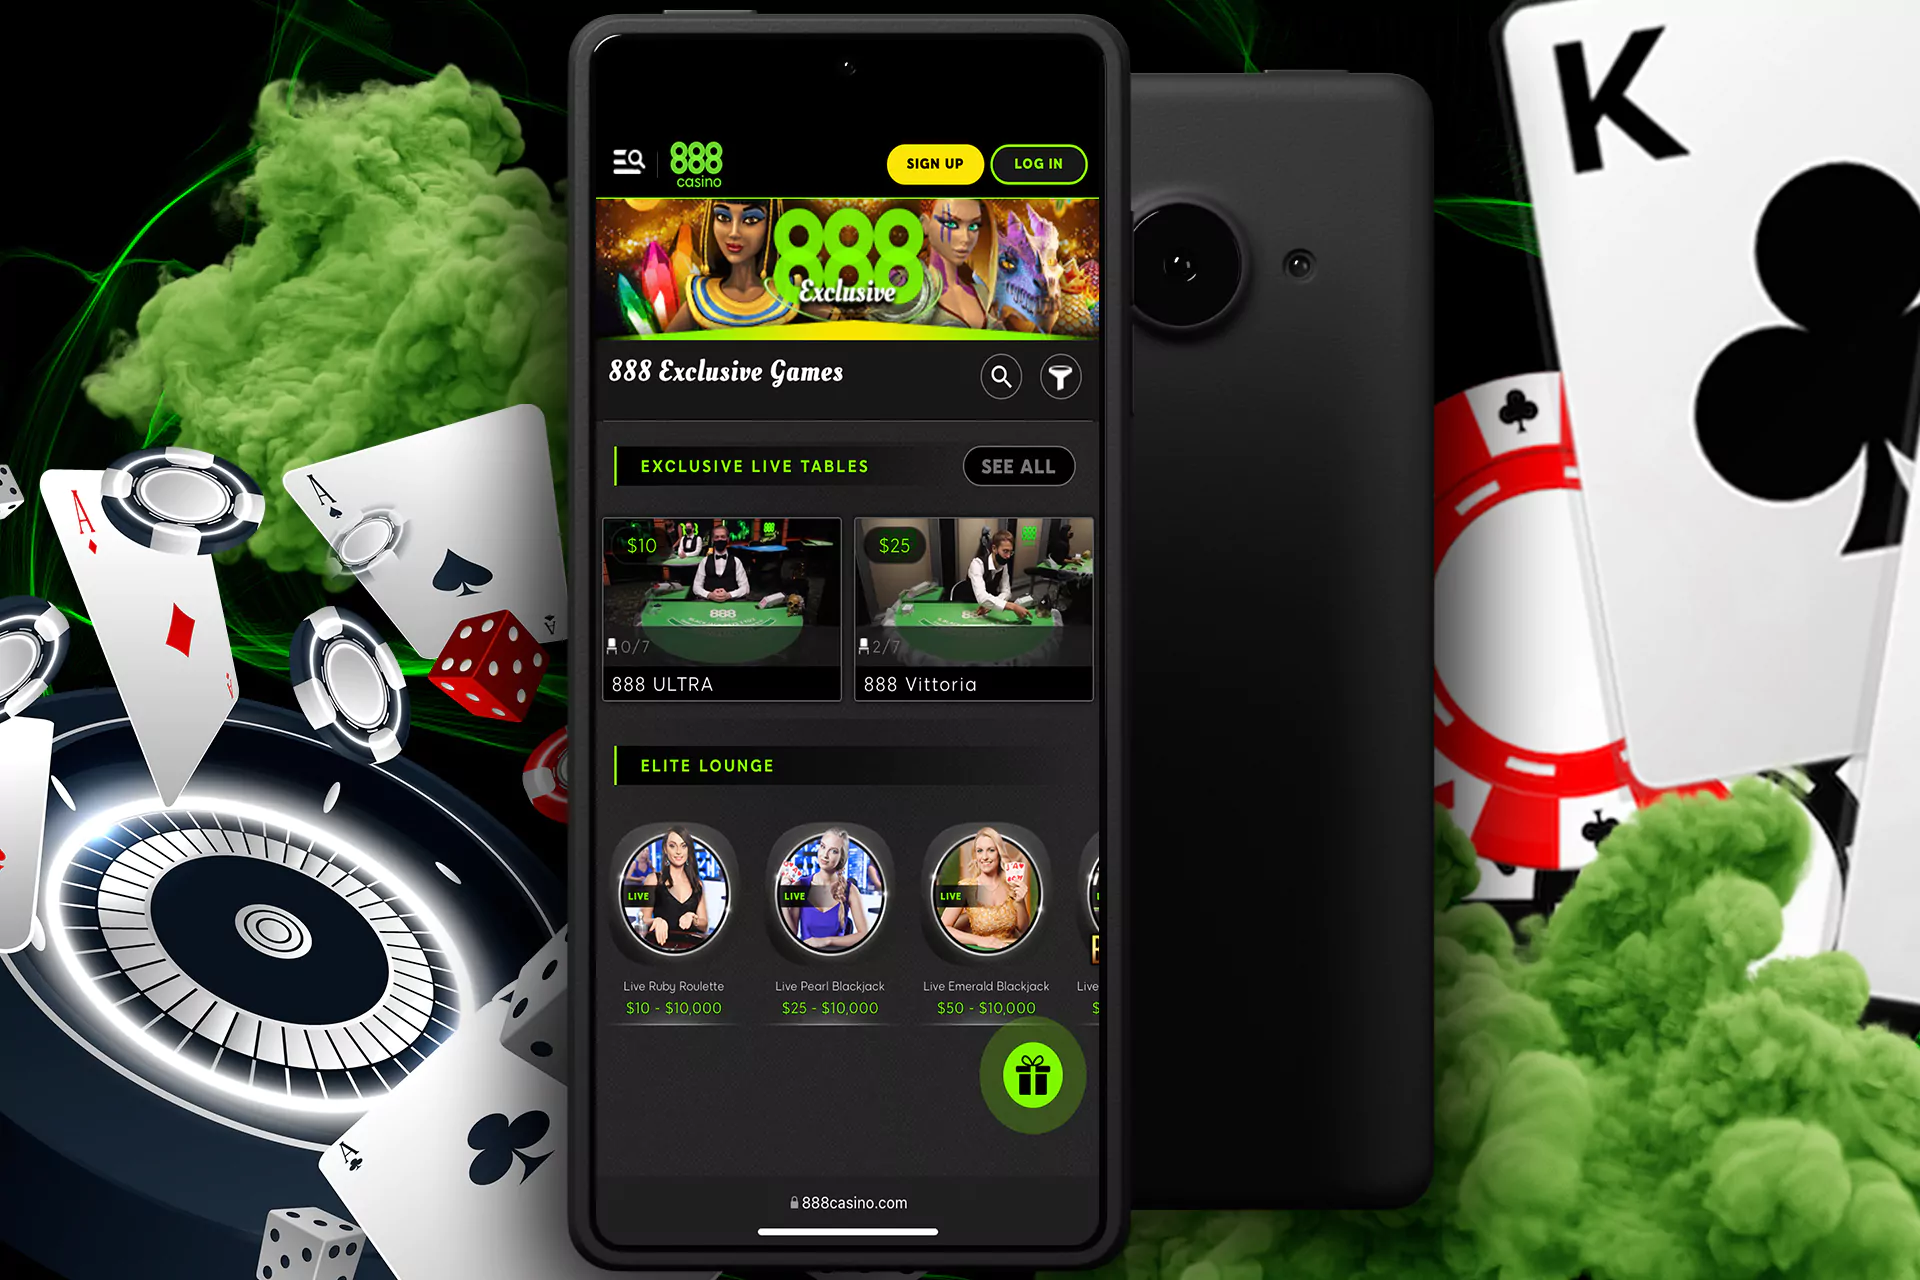 888sport offers some of exclusive casino games in its app.